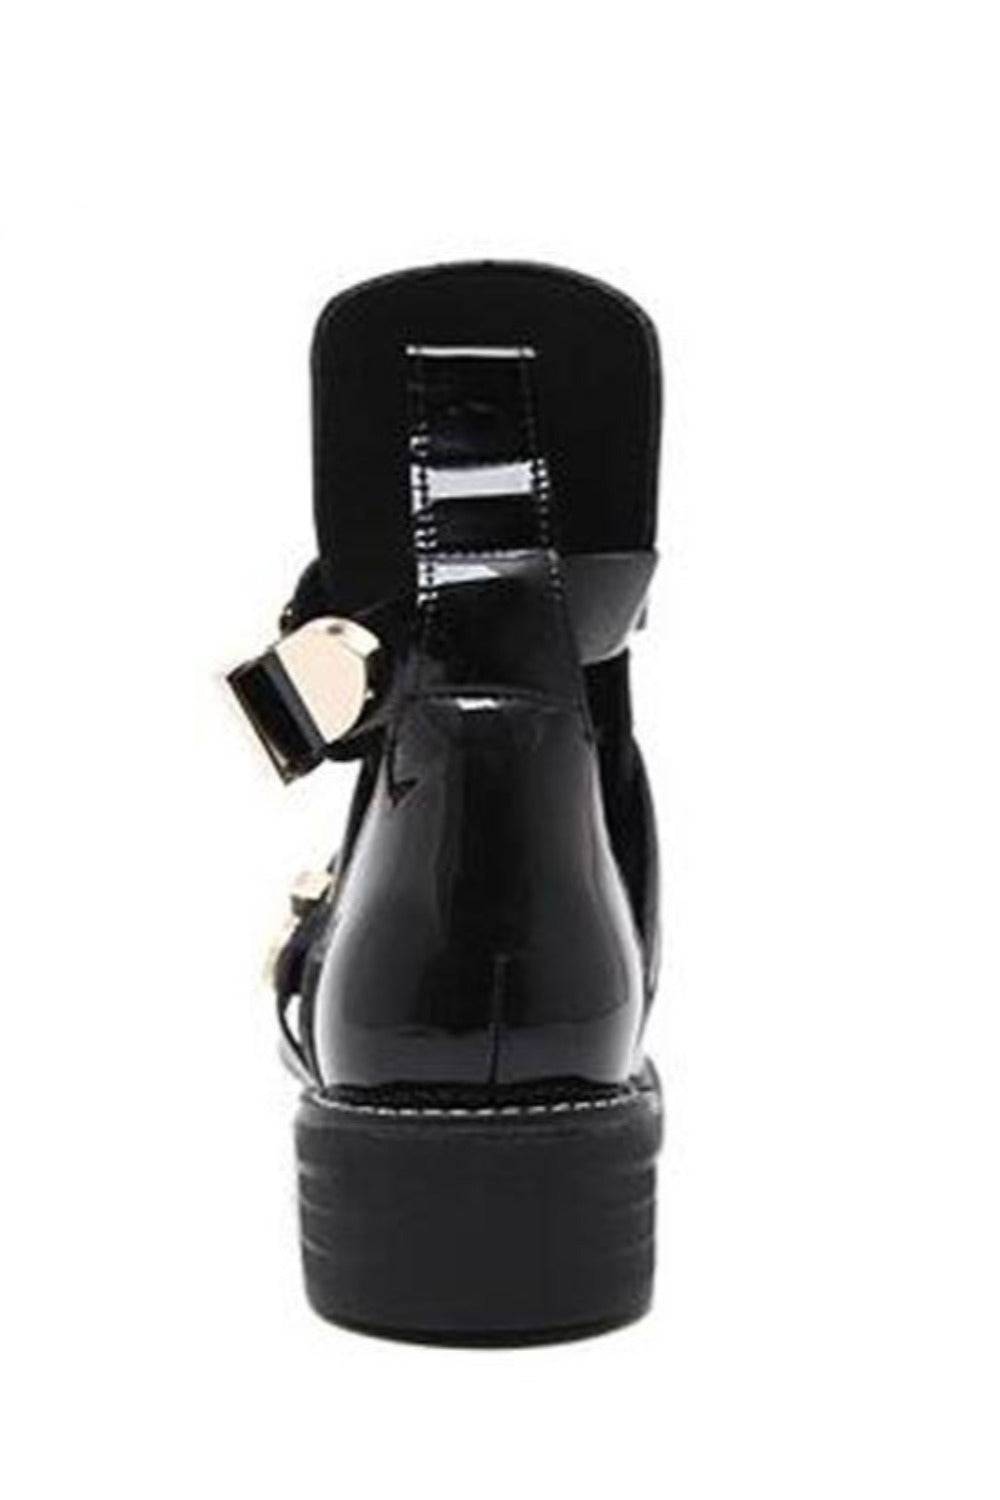 Let It Be Gold Buckle Black Ankle Boots - TGC Boutique - Ankle Booties